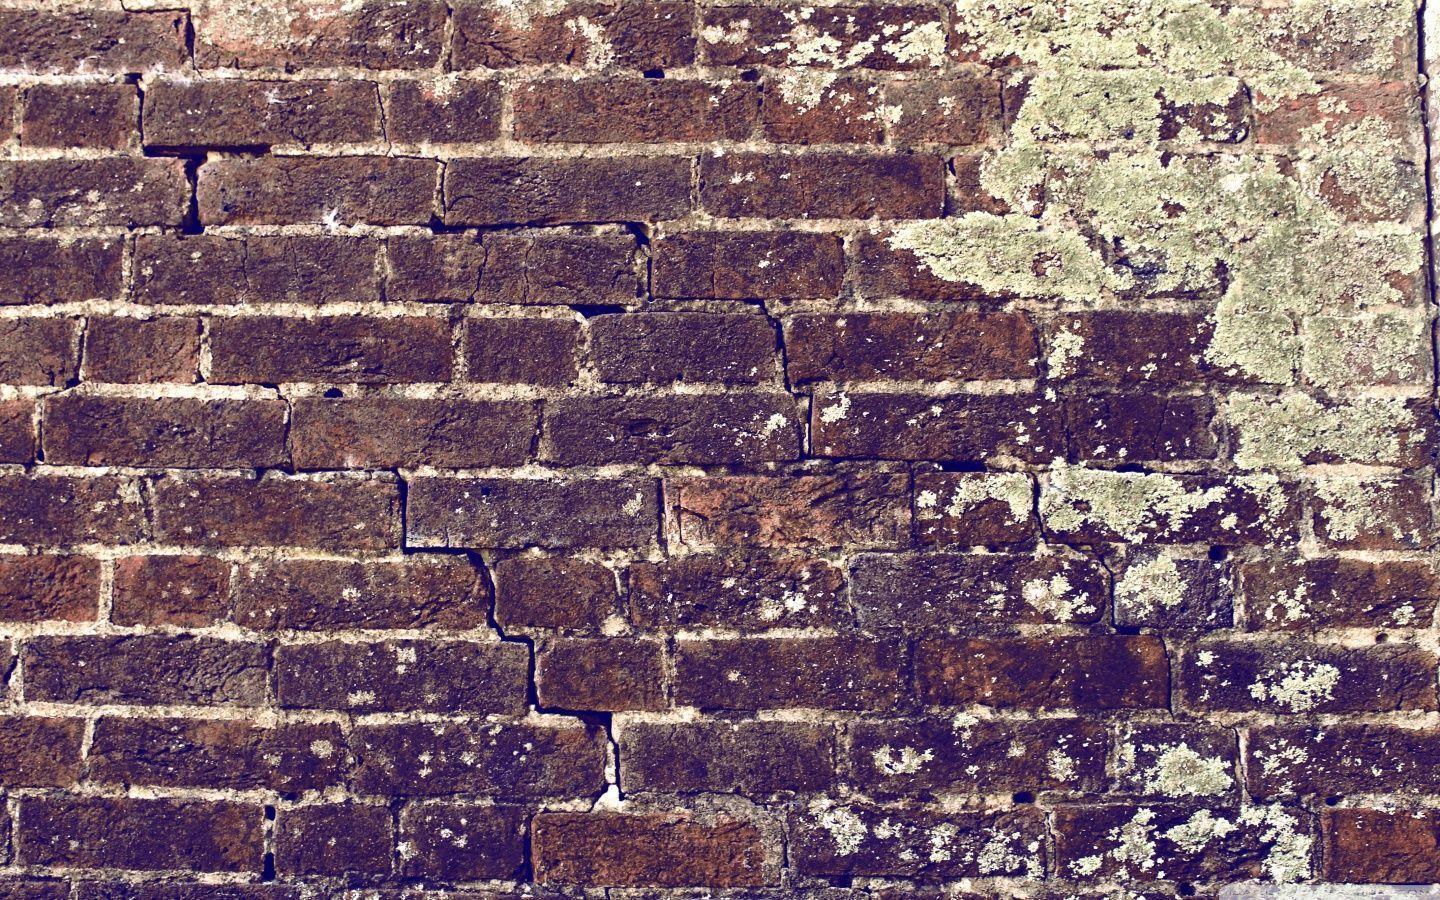 30,000+ Free Wall & Texture Images - Pixabay